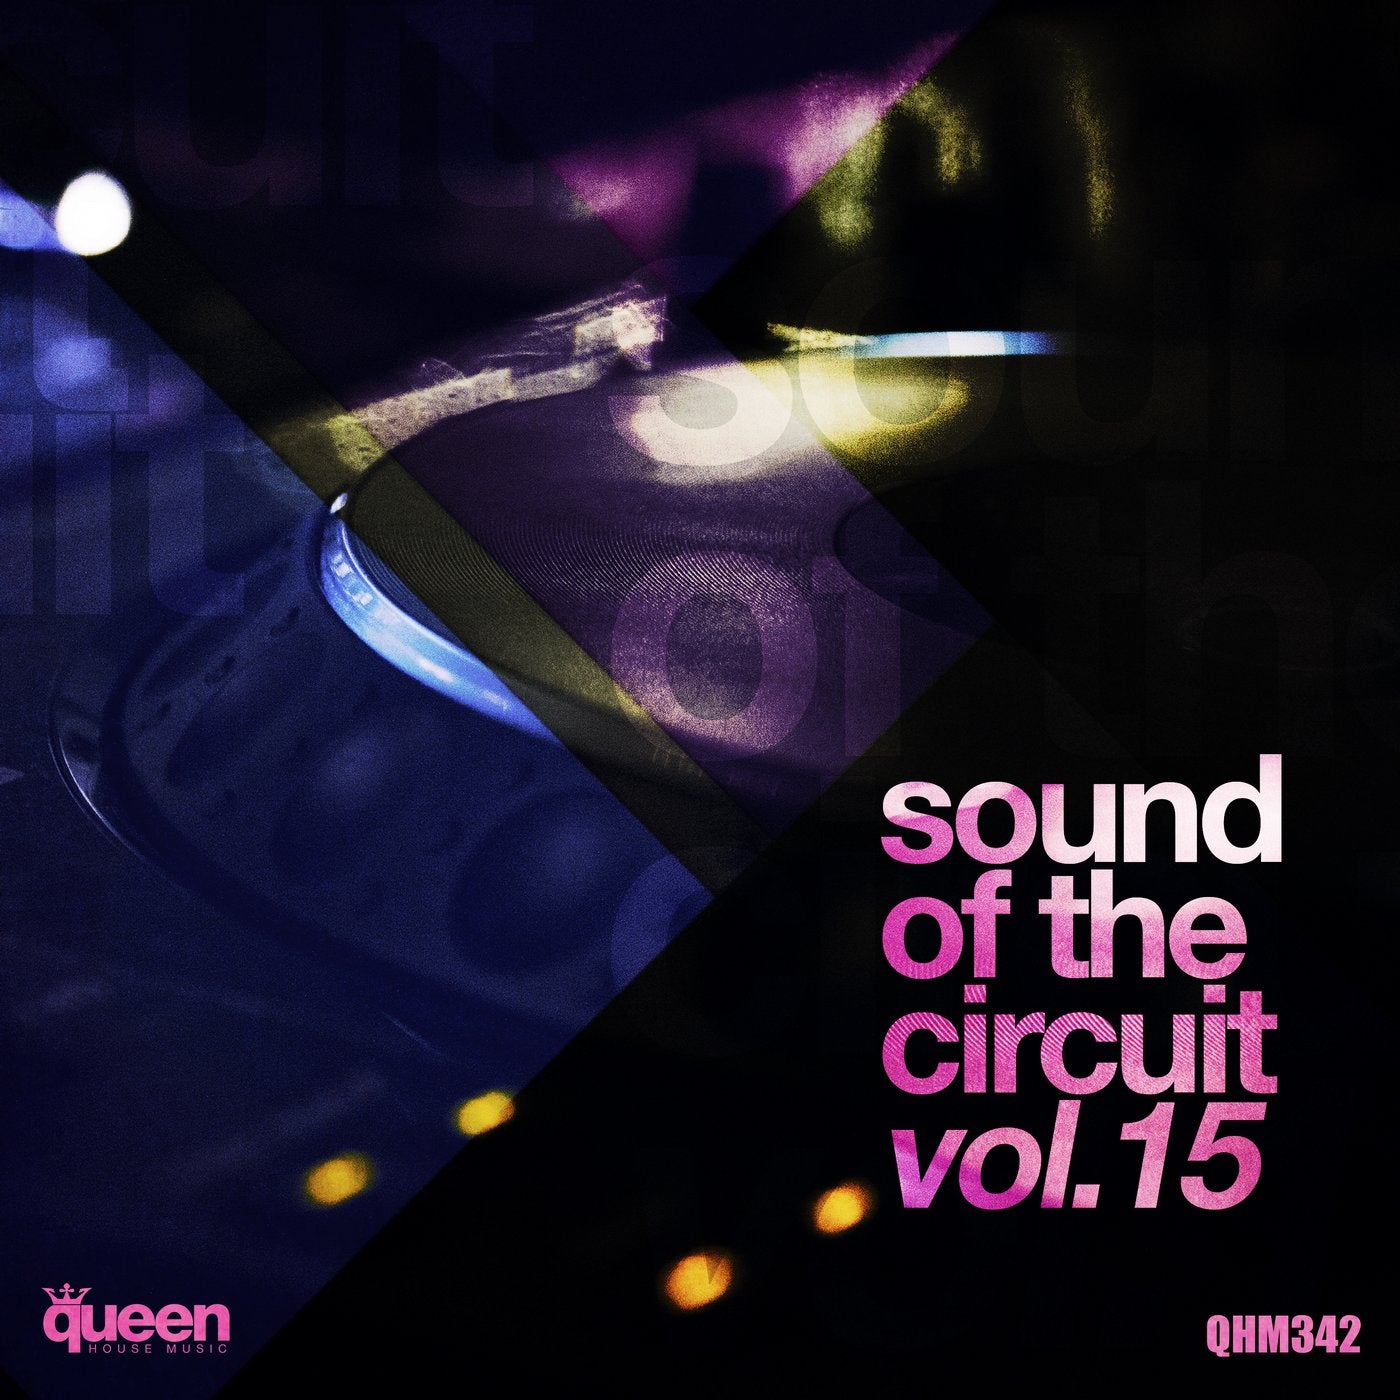 Sound of the Circuit, Vol. 15